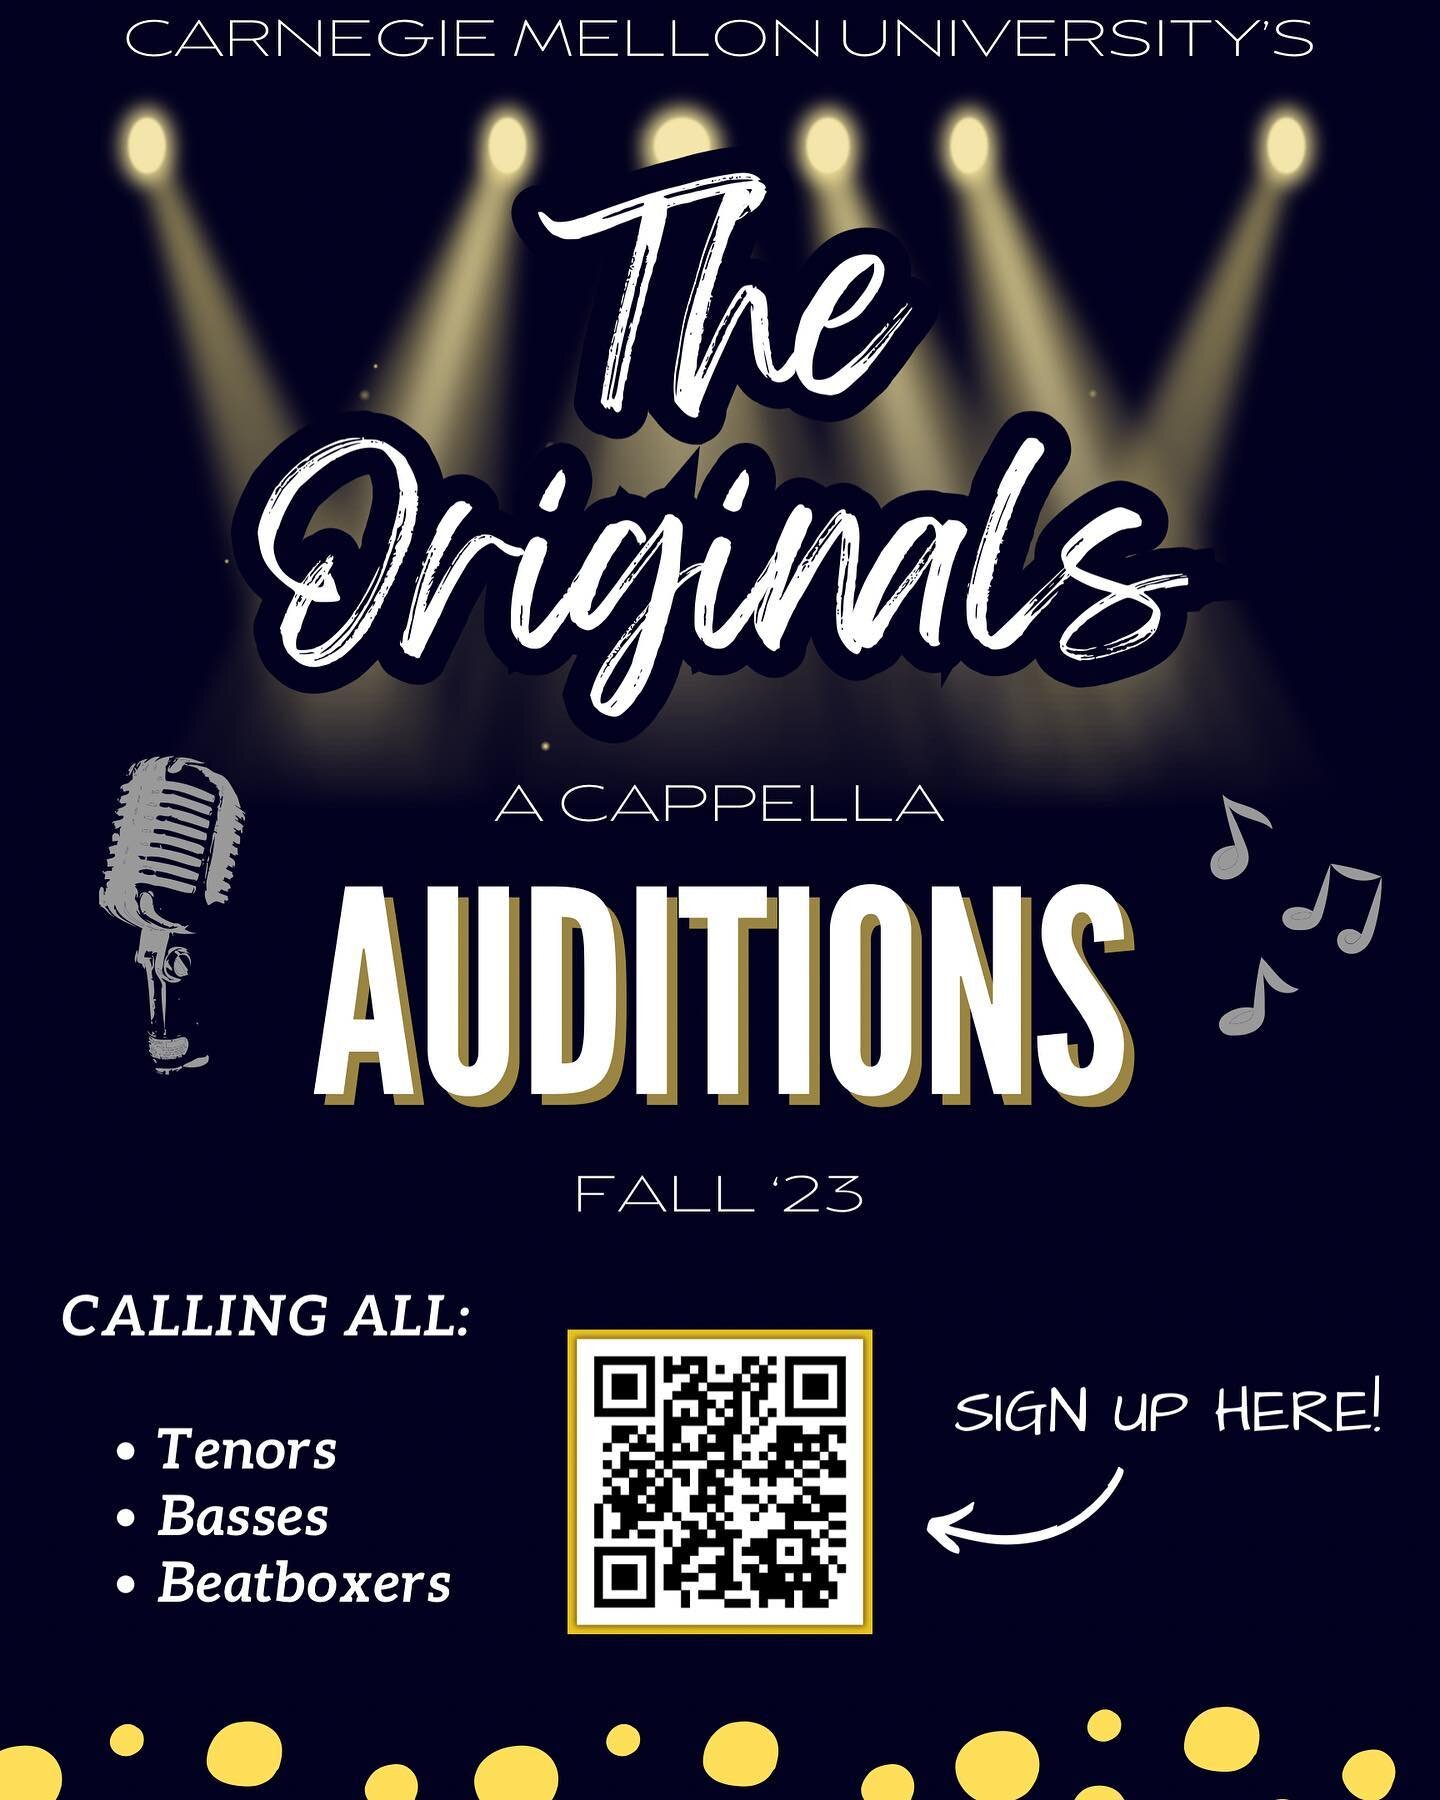 The Originals are back on campus and pumped for an exciting new semester!! Want to become part of our family? Join us at auditions, this Thursday, Friday, and Saturday (Sept. 7, 8, &amp; 9)! 
To sign up, visit our website&rsquo;s audition section (th